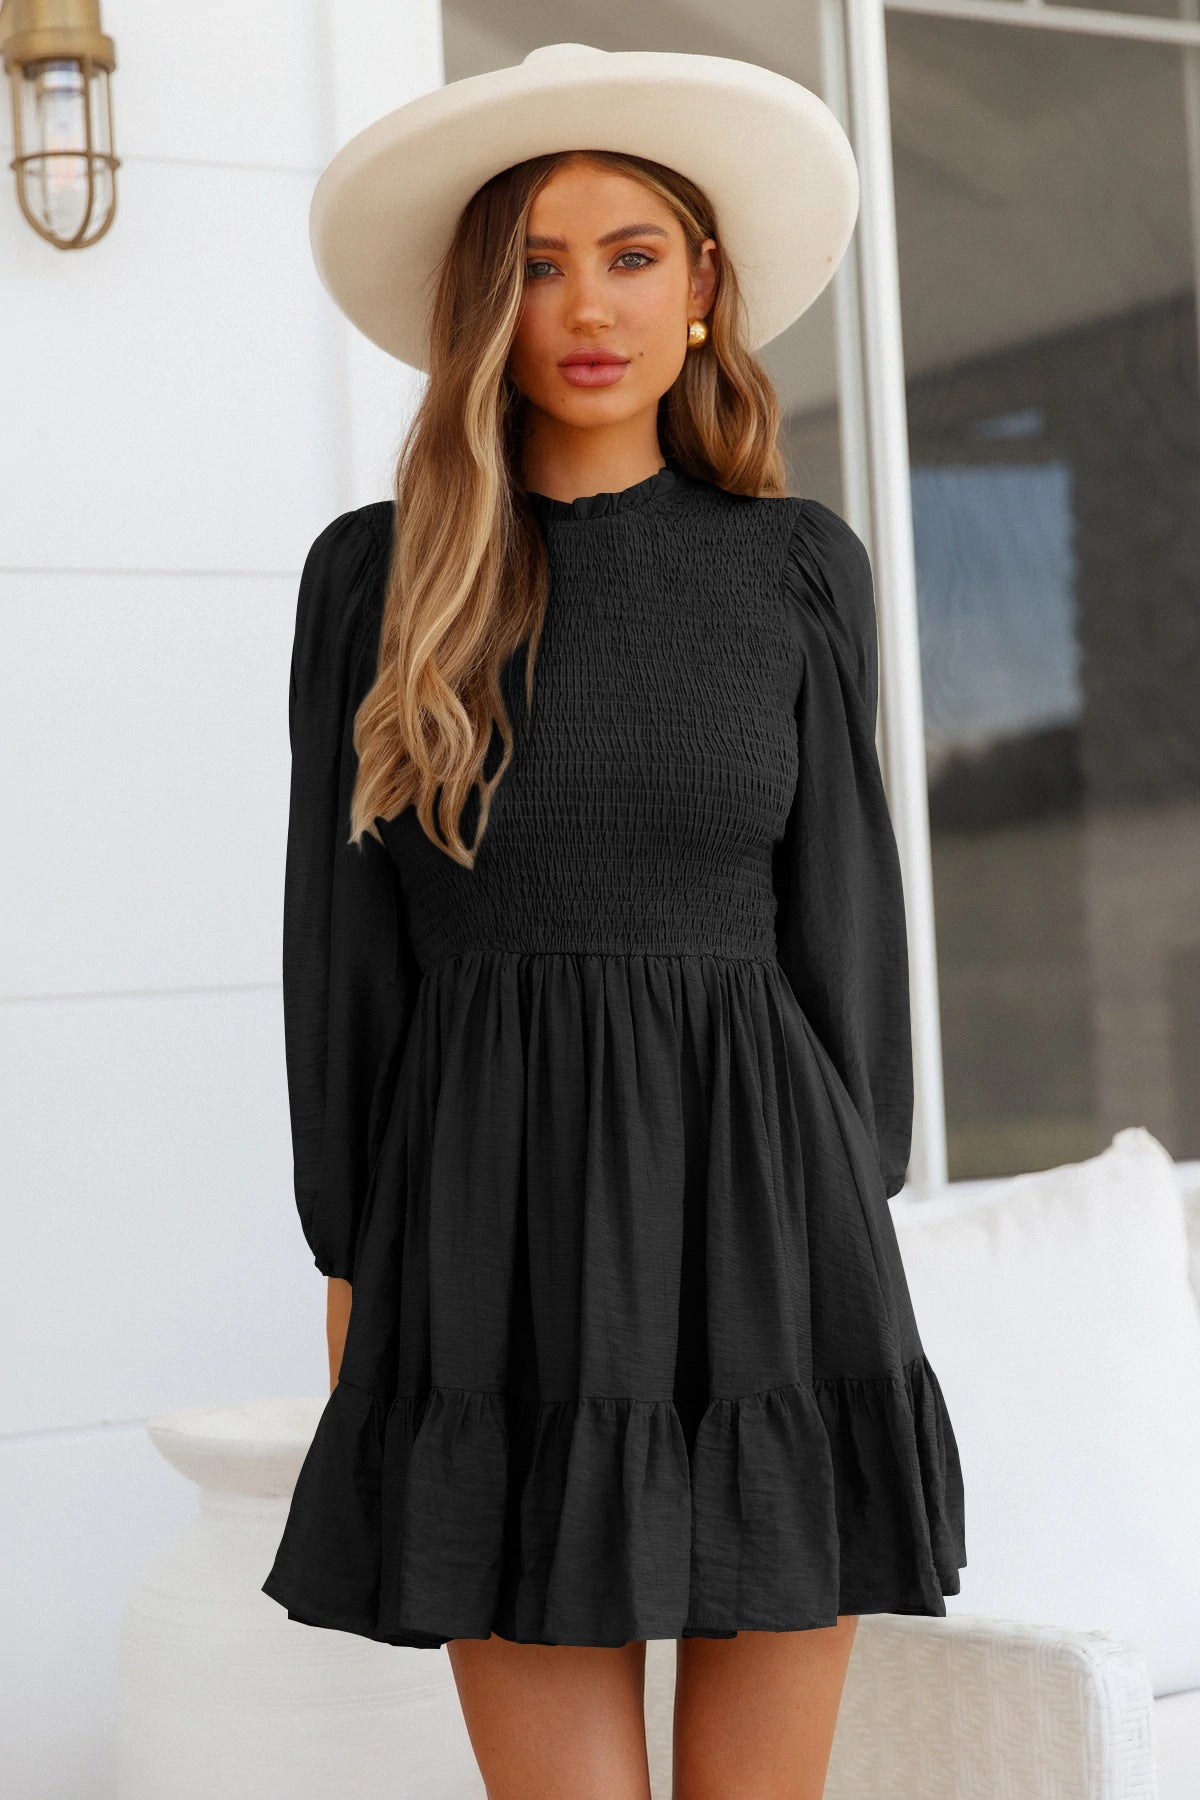 AB07MD Cross-border Hot Sale New European And American Autumn Fashion Women's Long Sleeve Ruffled Dress Temperament High-end French Skirt